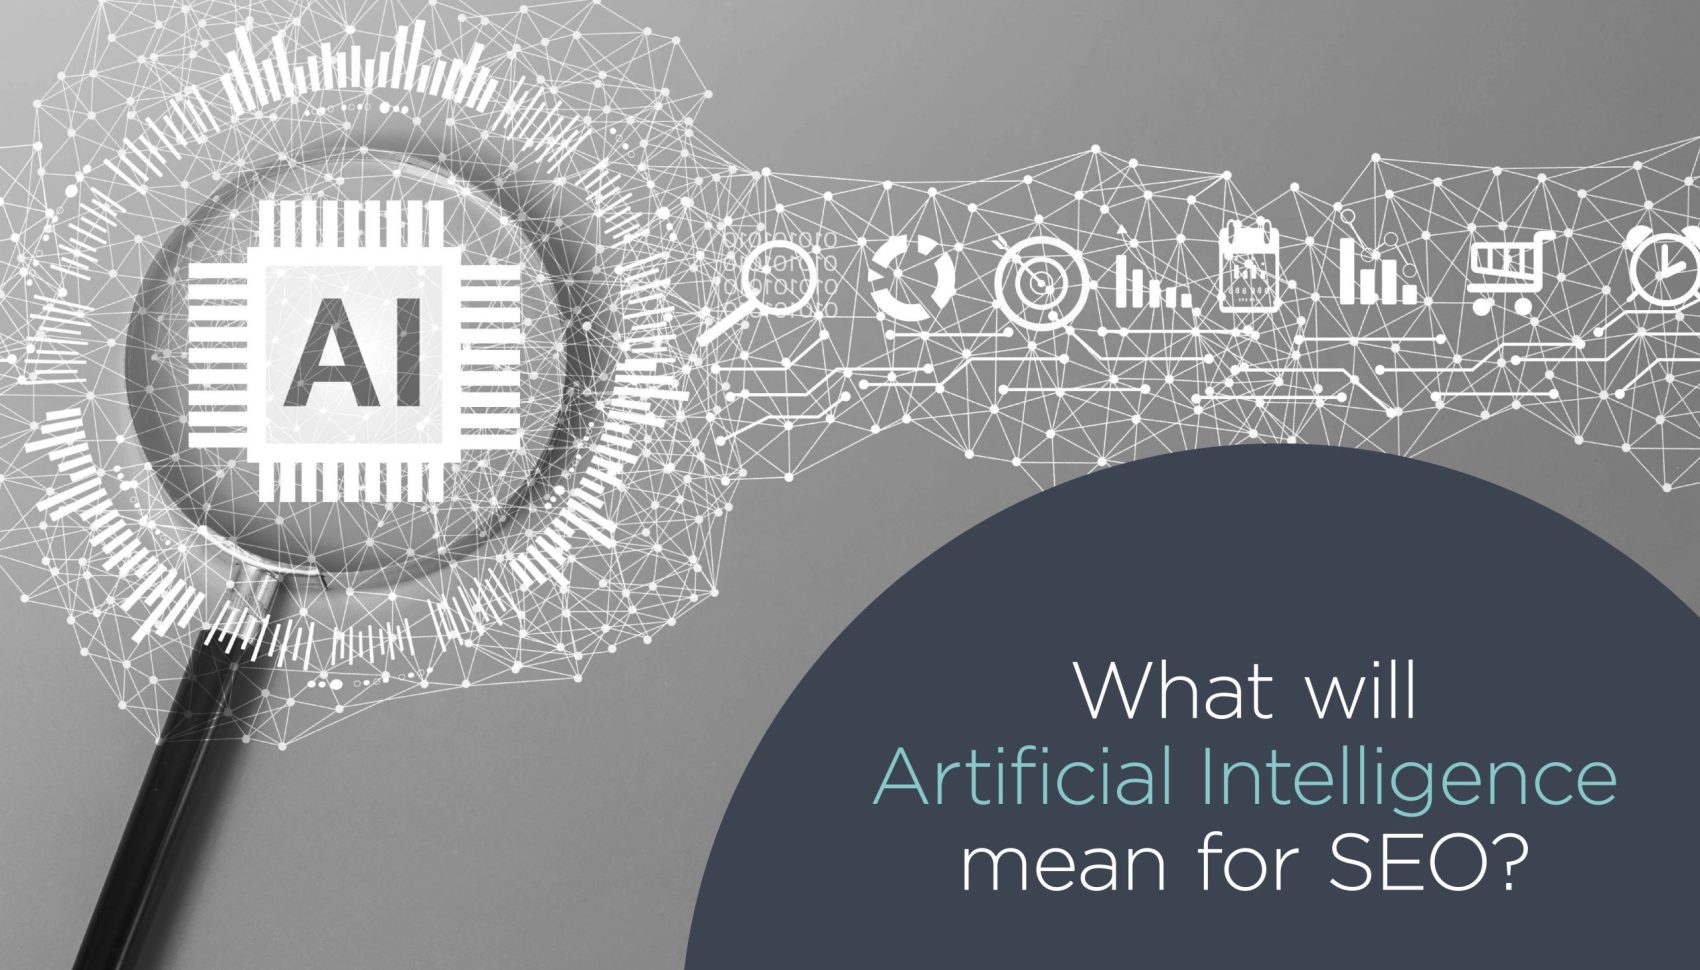 What will Artificial Intelligence mean for SEO?